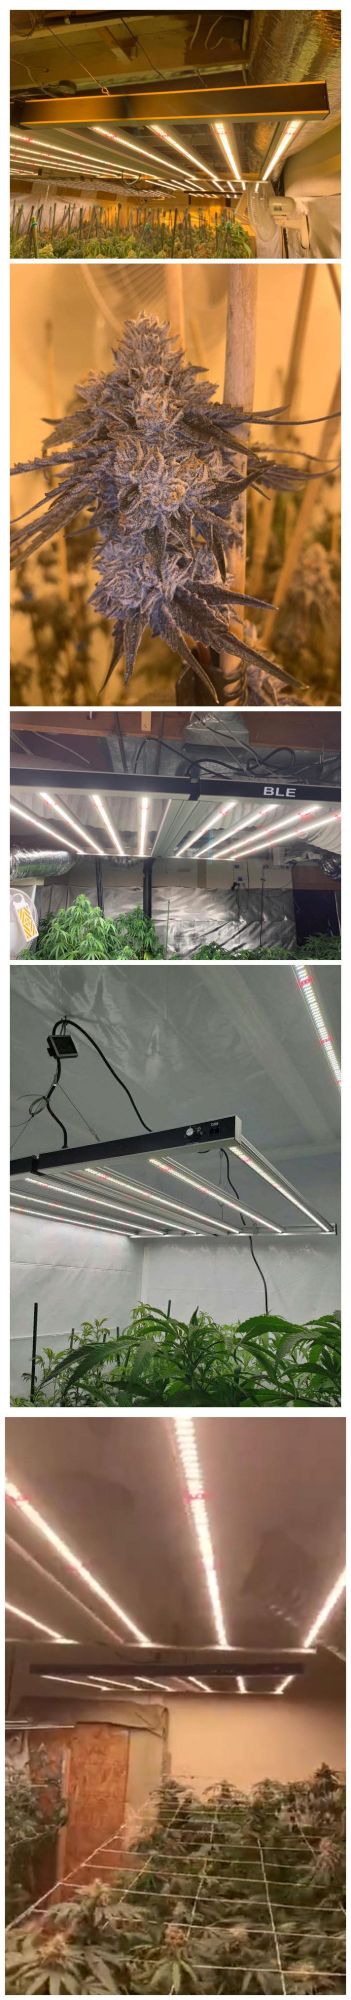 2020 LED Grow Light LED Light Growing Plants Hydroponic Lighting Systems for Medical Plants 880W